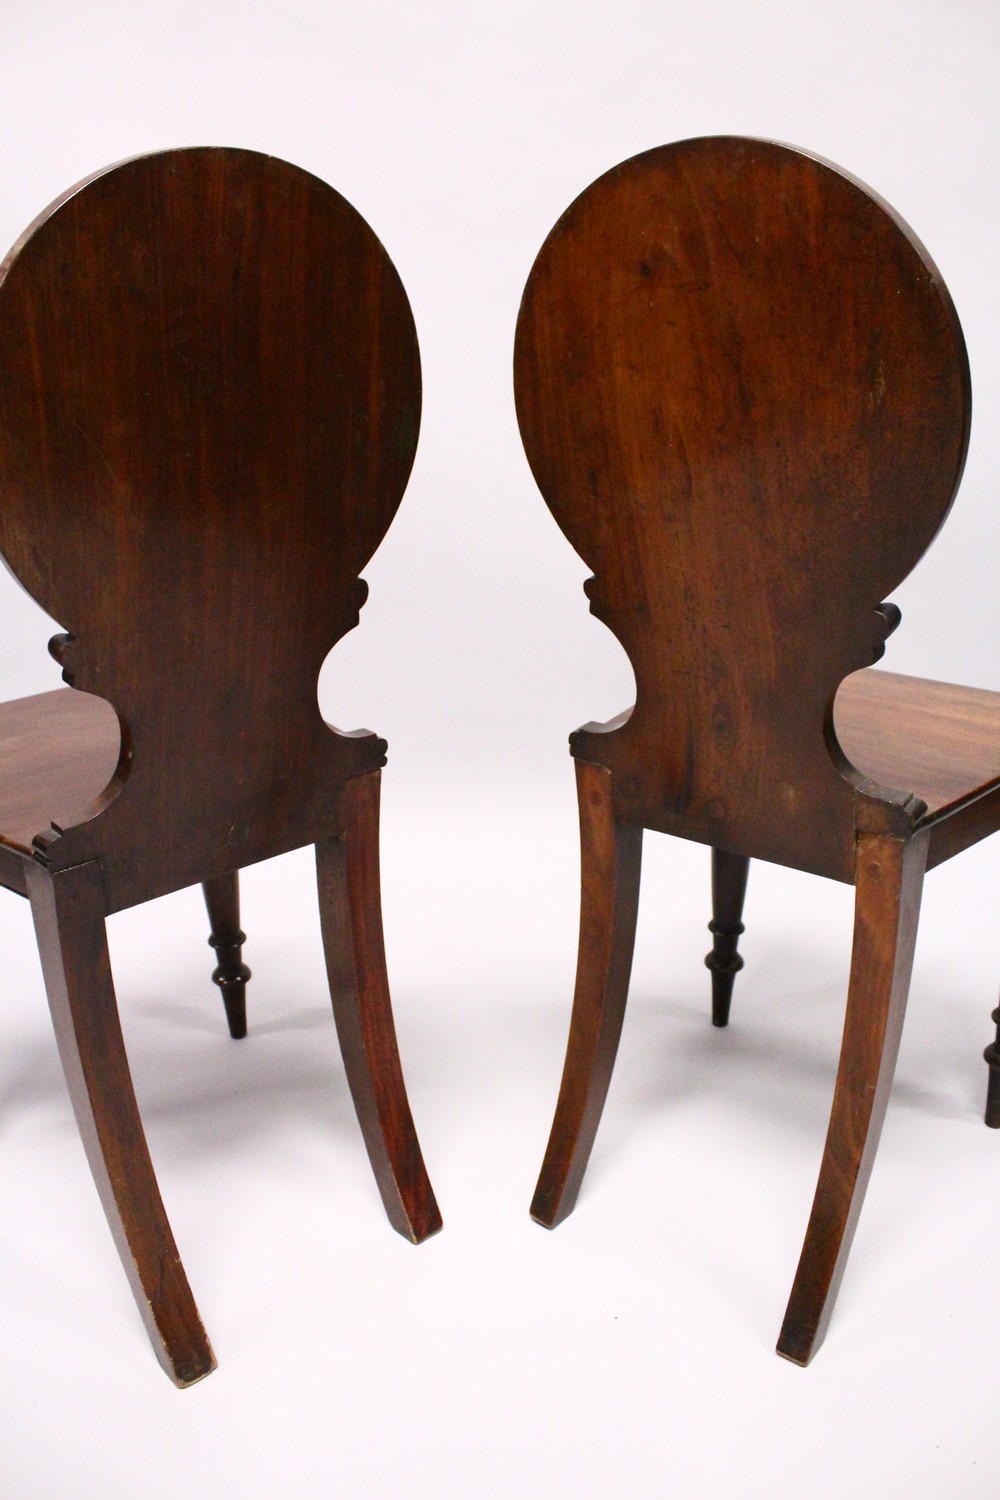 A GOOD PAIR OF REGENCY MAHOGANY HALL CHAIRS, the circular backs with painted crests, solid seats - Image 4 of 5